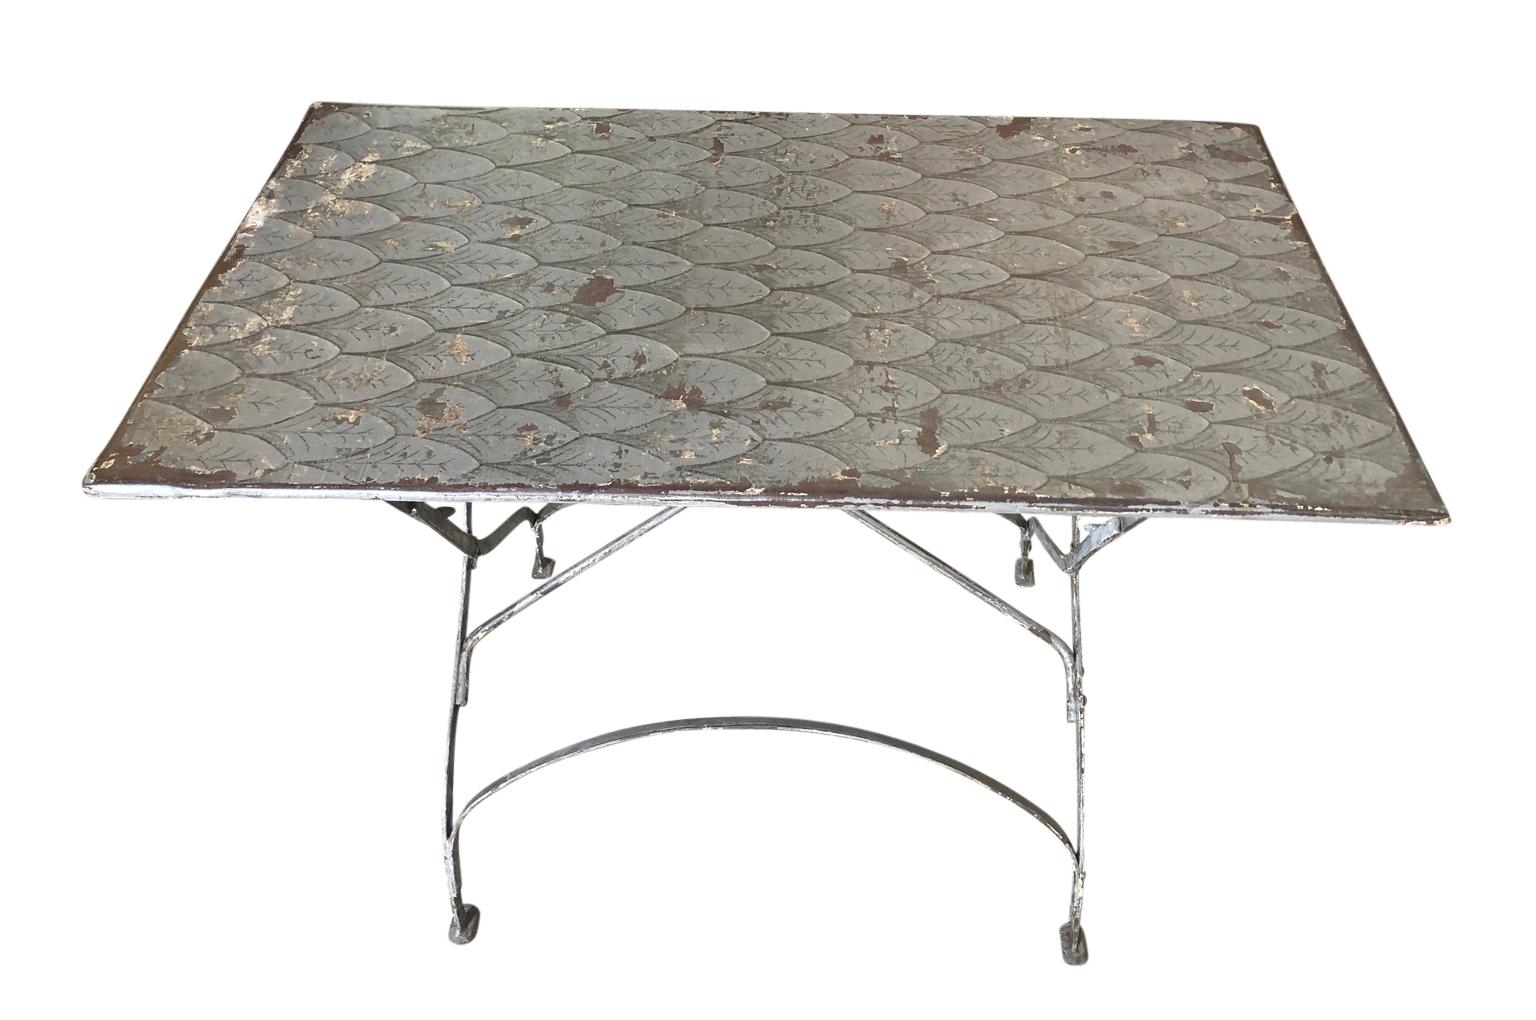 A very charming later 19th century iron collapsible garden table for the Barcelona area of Spain. Fabulous painted finish. A terrific accent piece for any casual interior or garden.